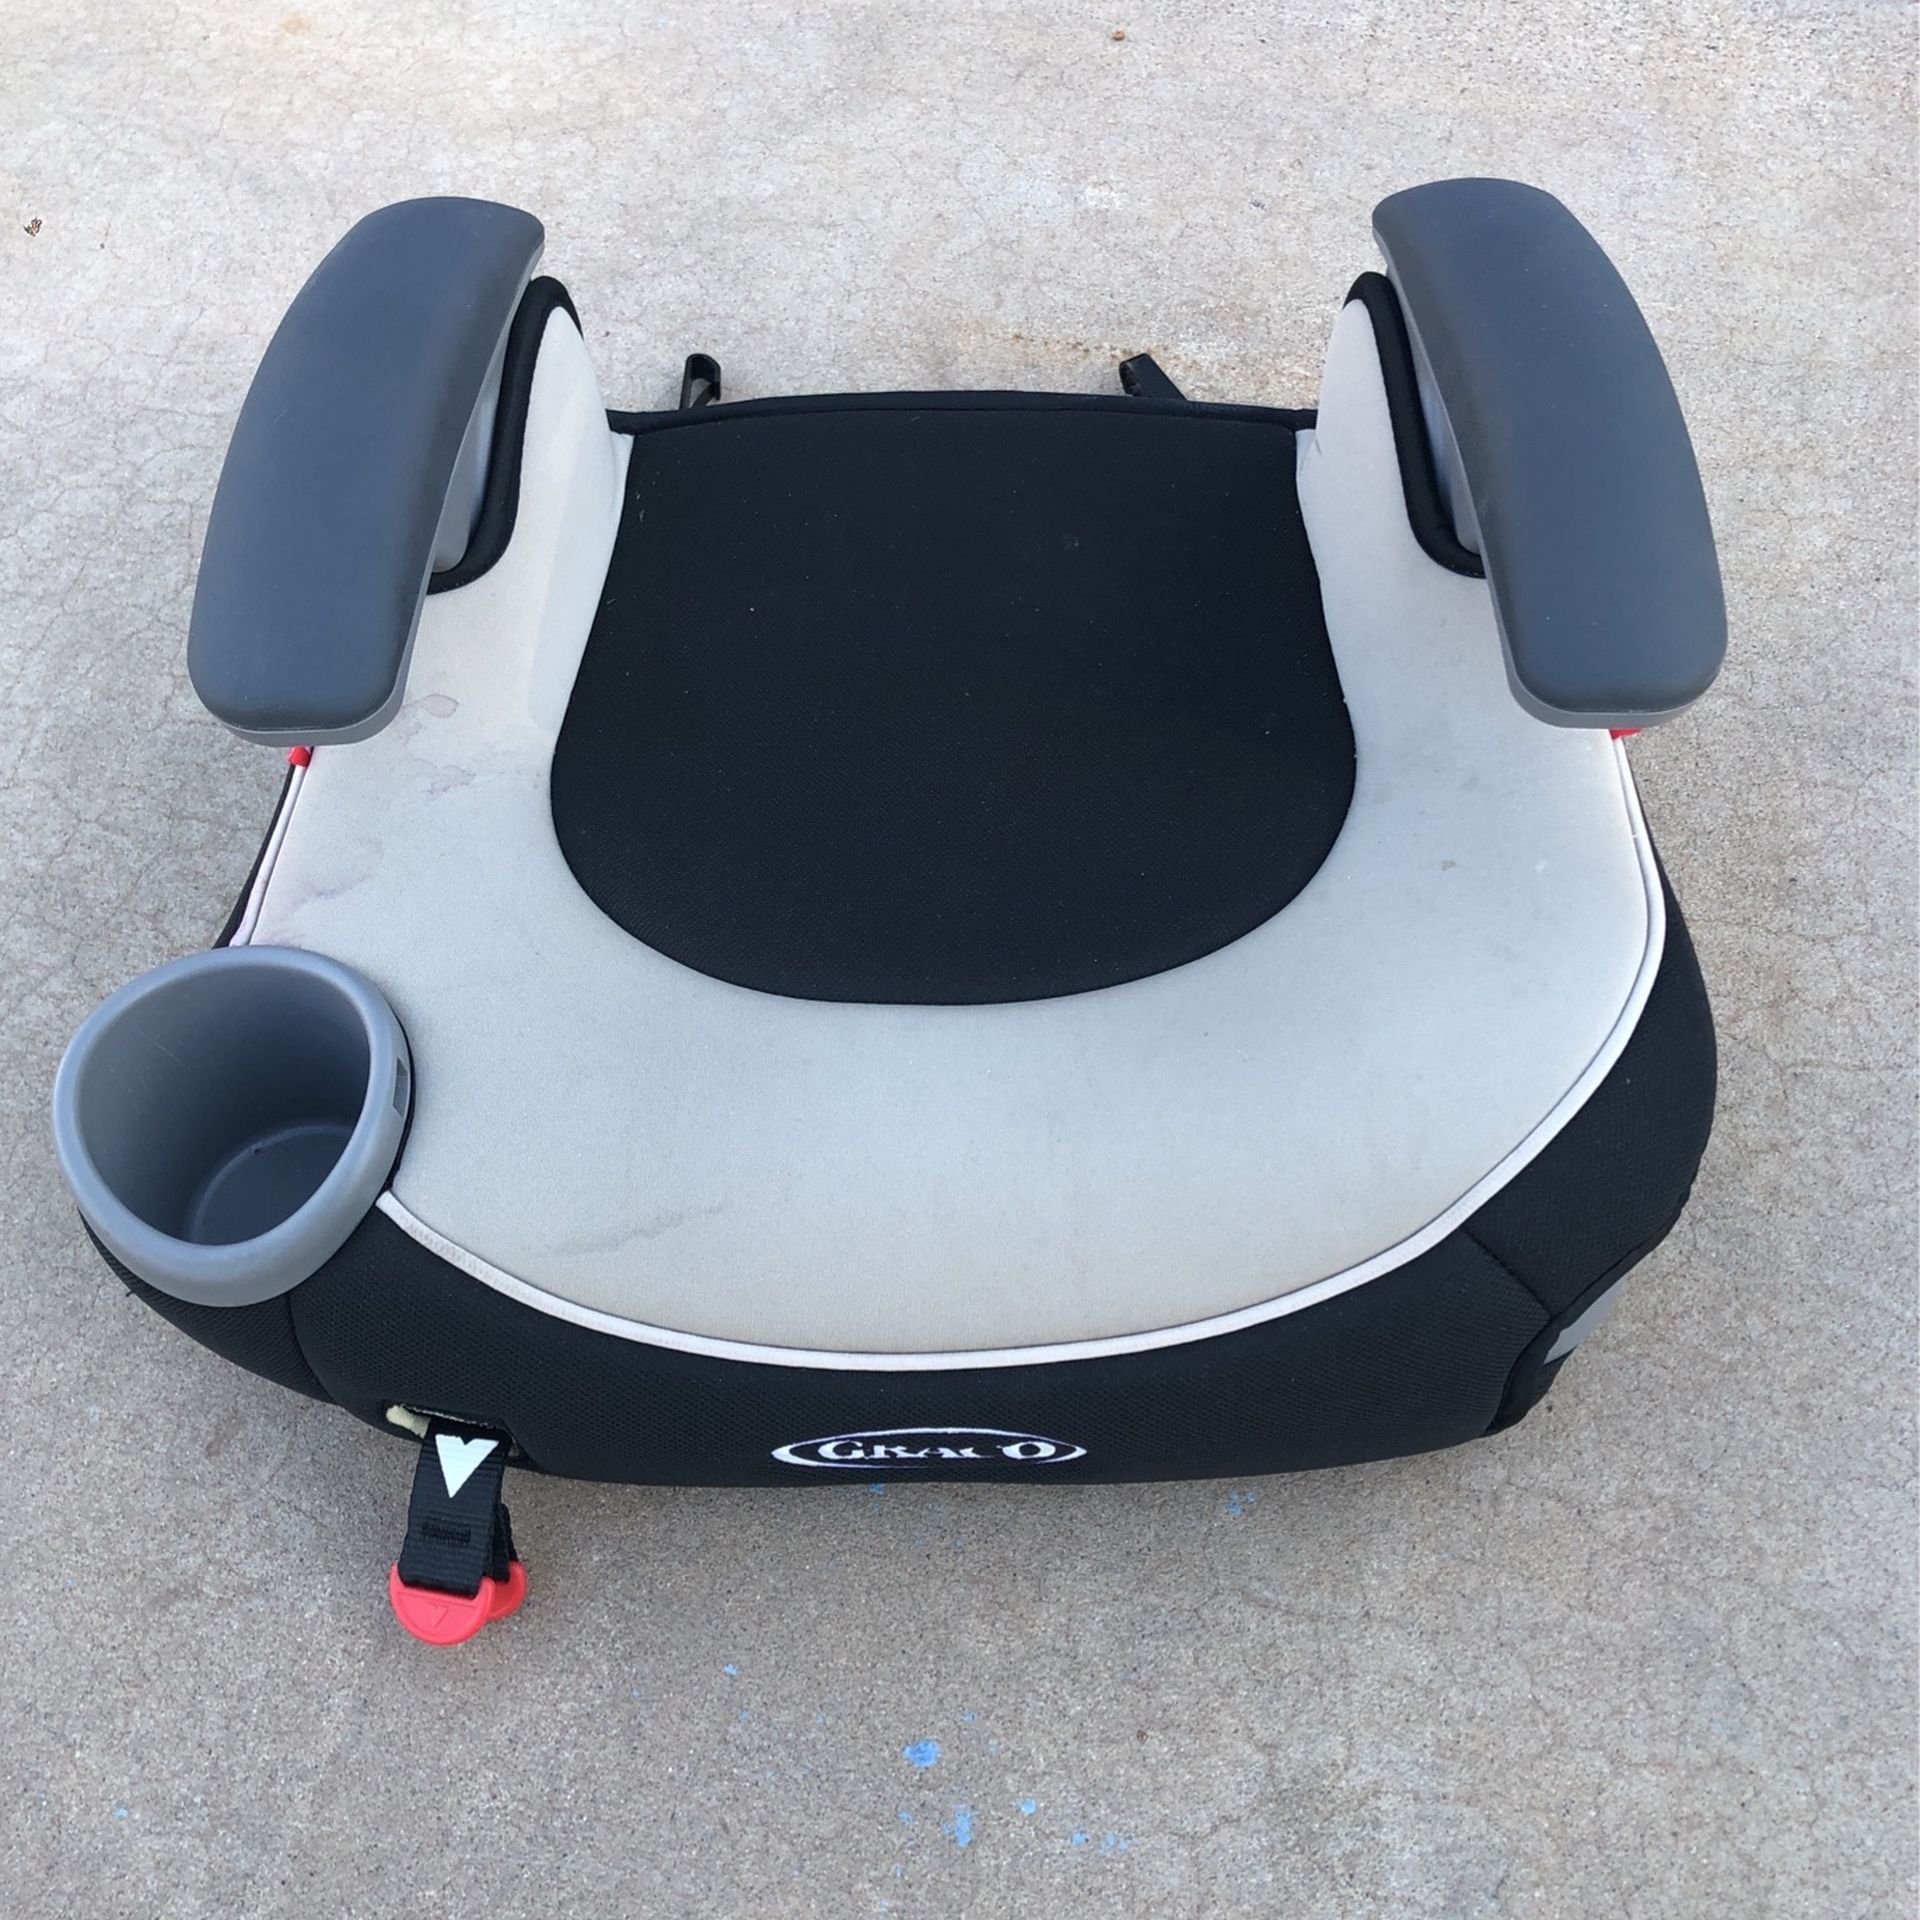 Graco Booster Seat With Latch